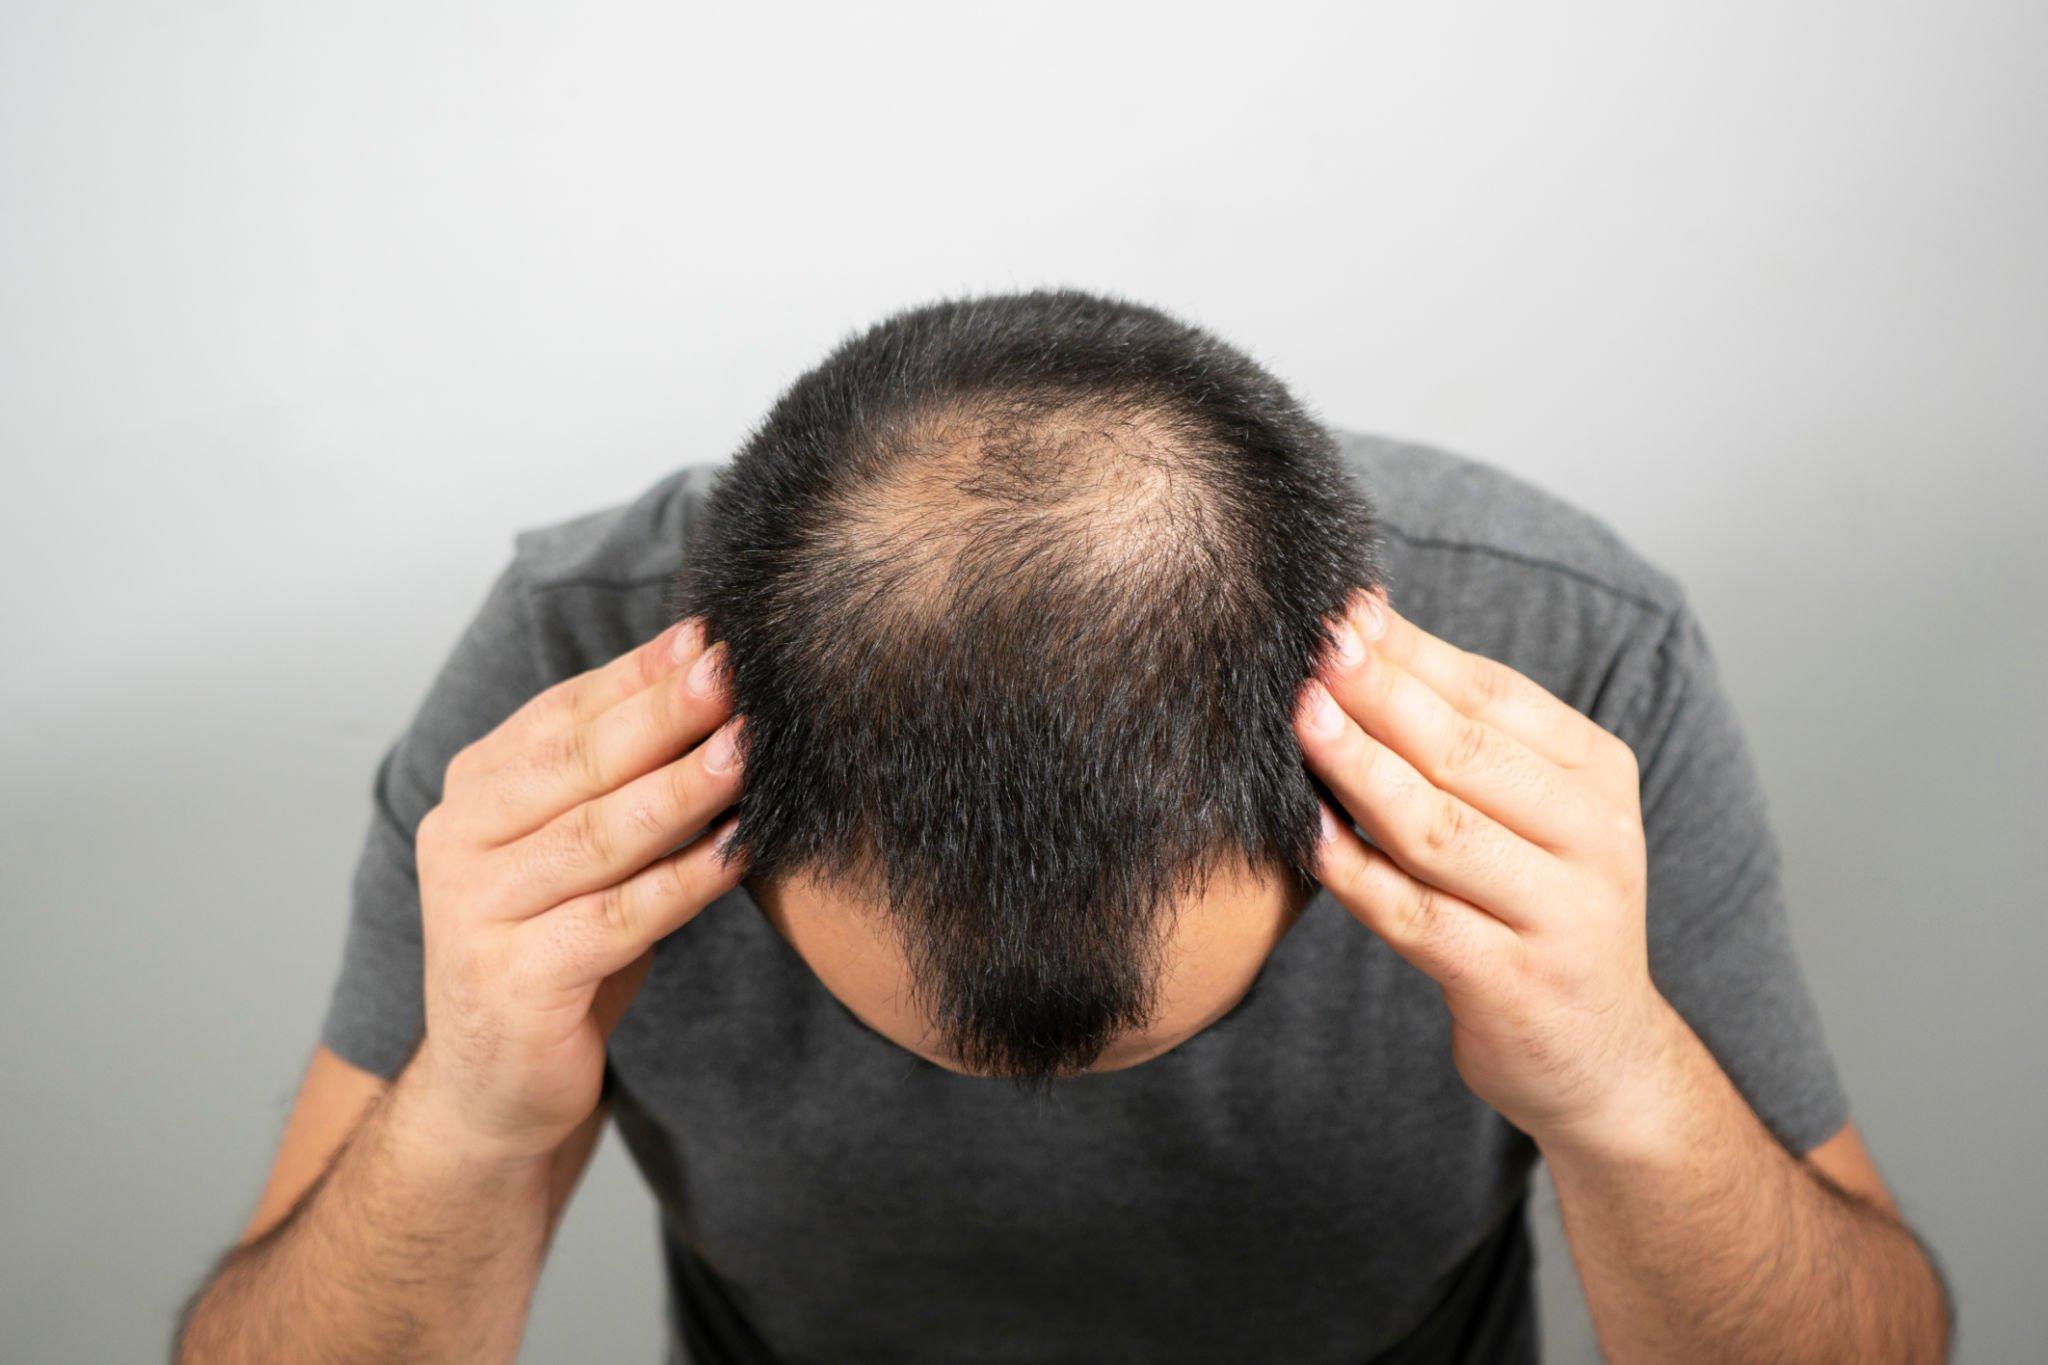 Types of hair loss There are five main types of hair loss: